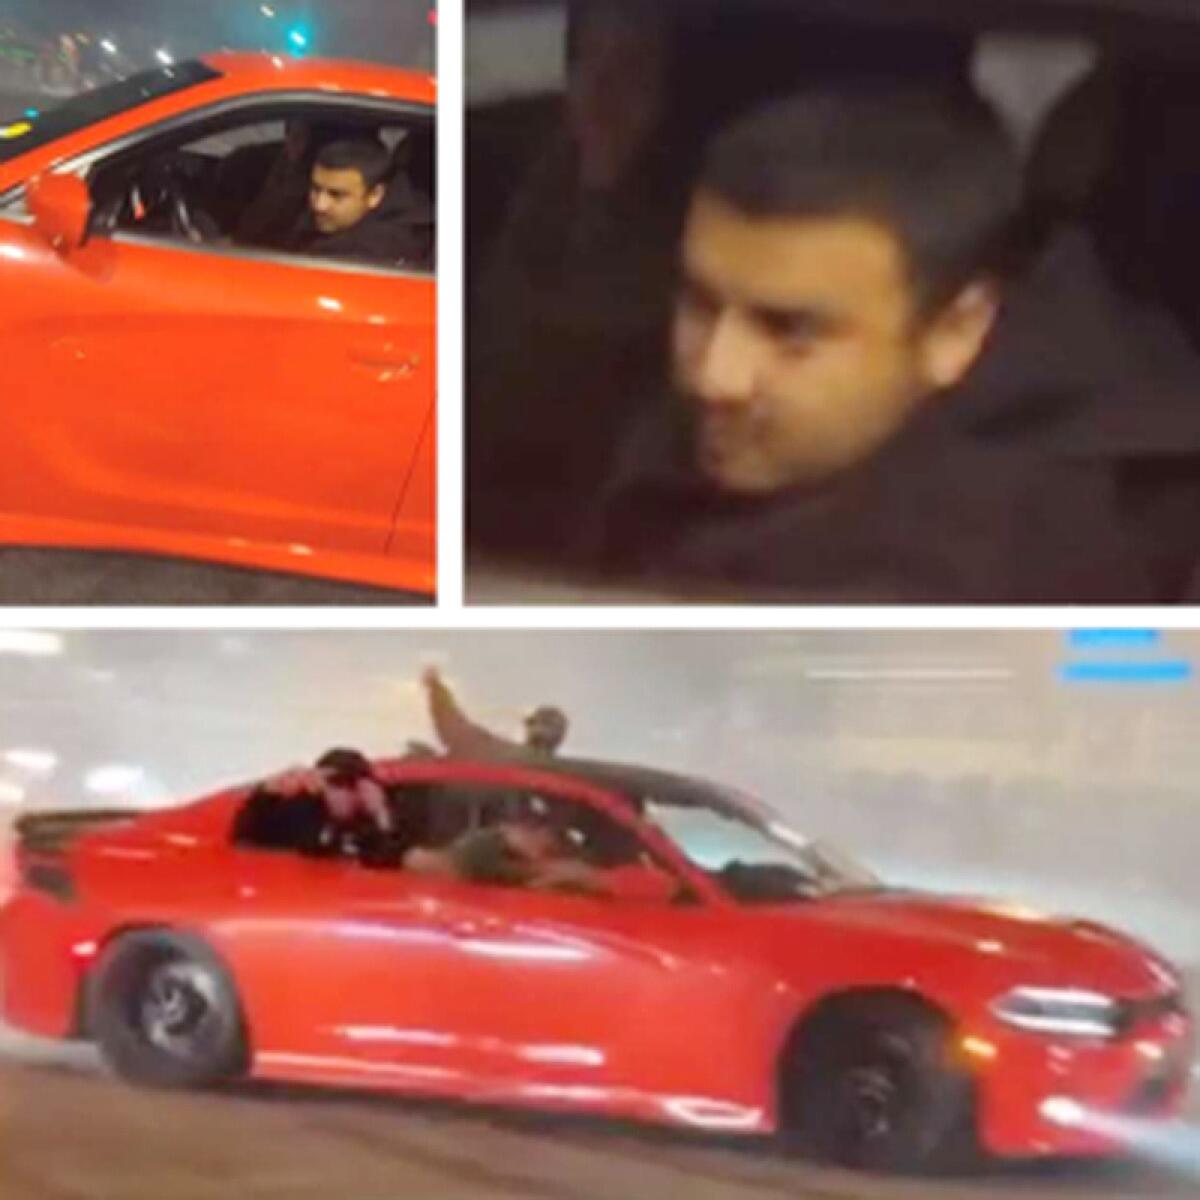 Screenshots show closeups of a driver and a car doing burnouts as people hang out of its windows